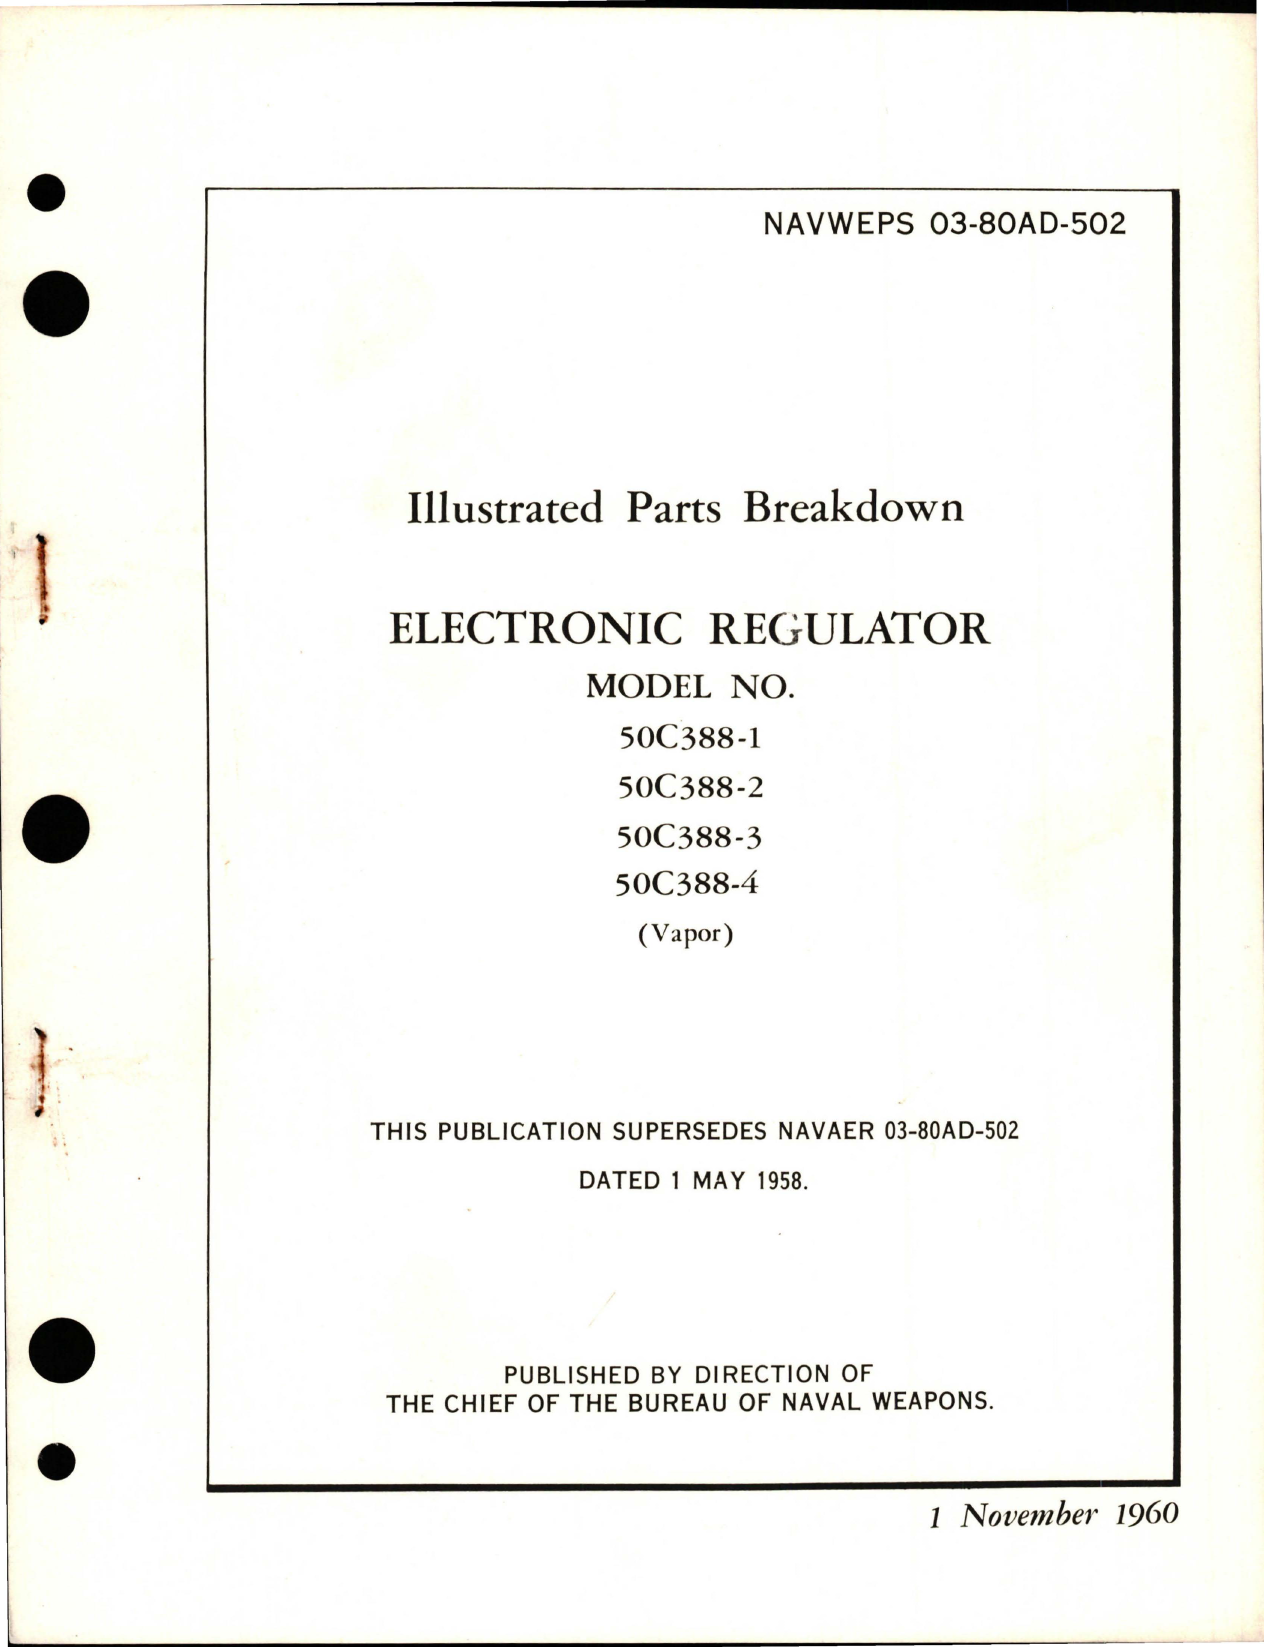 Sample page 1 from AirCorps Library document: Illustrated Parts Breakdown for Electronic Regulator